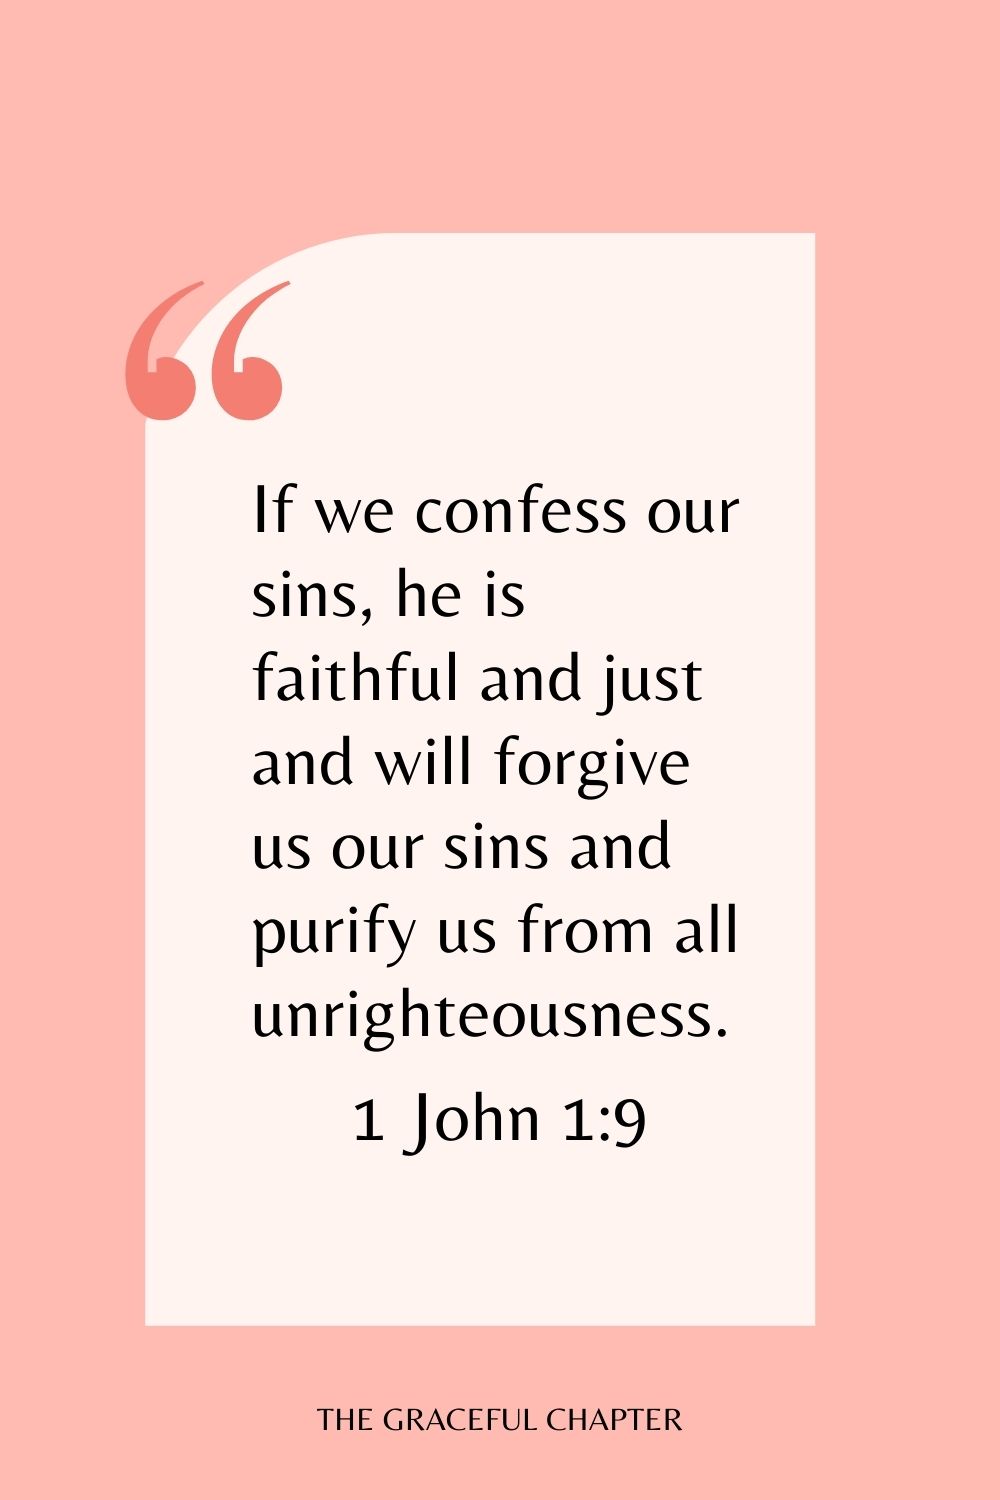 If we confess our sins, he is faithful and just and will forgive us our sins and purify us from all unrighteousness. 1 John 1:9